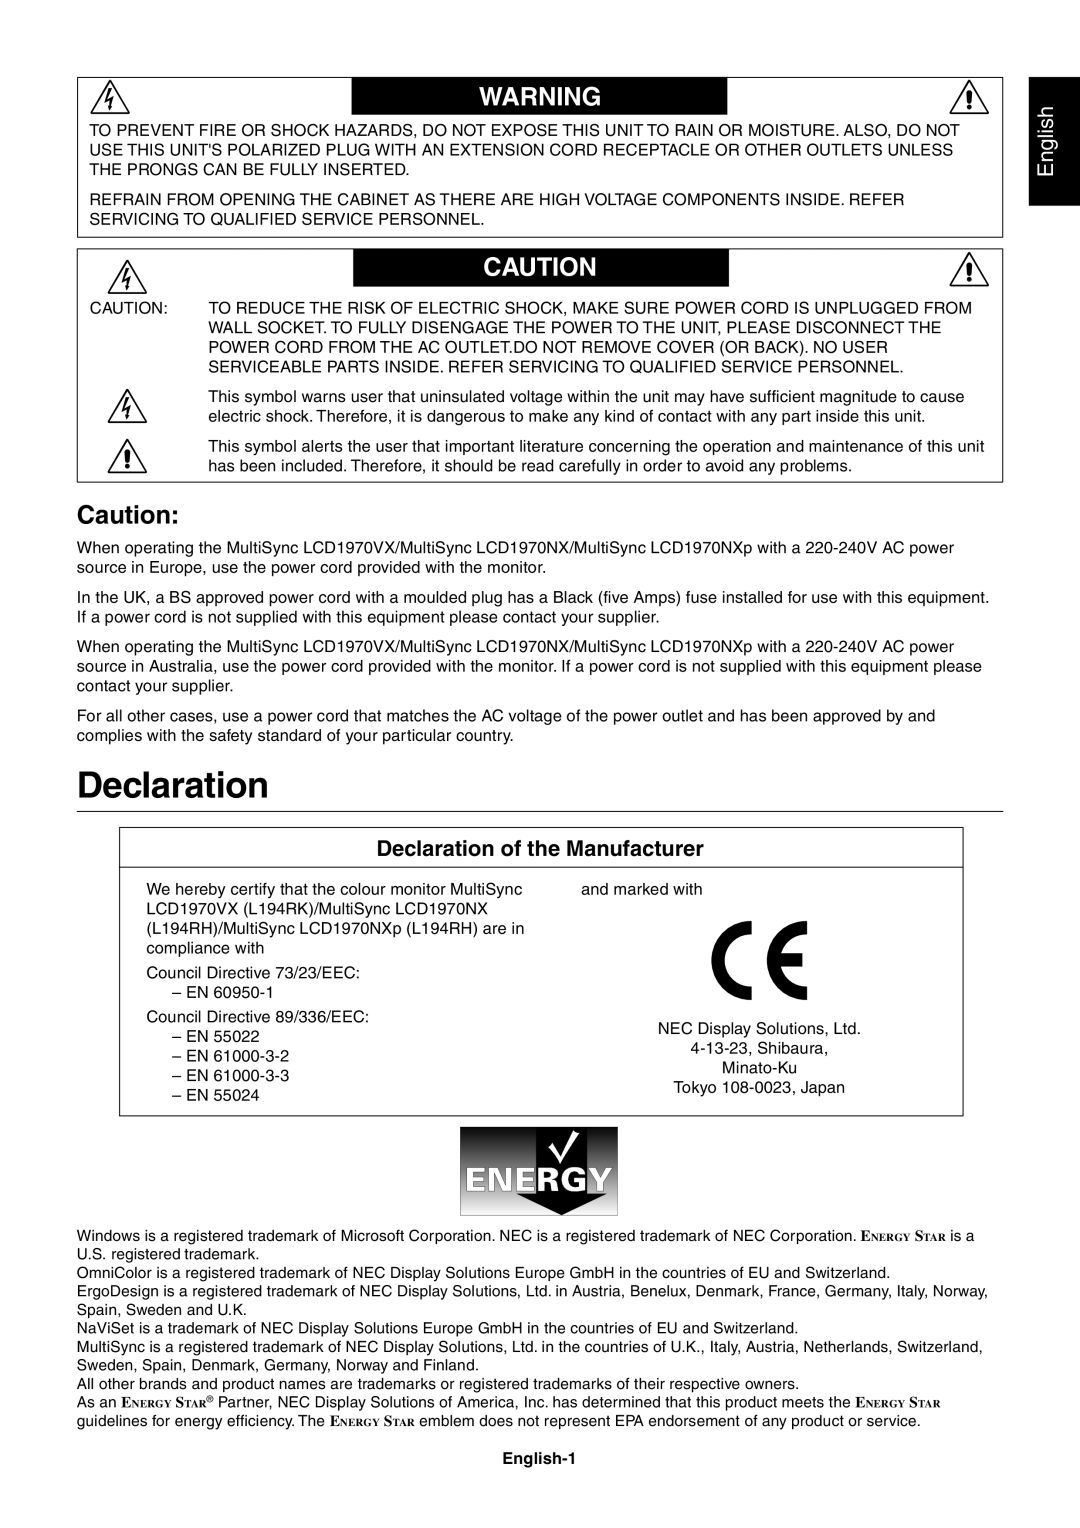 NEC LCD1970VX, LCD1970NXp user manual Declaration of the Manufacturer, English-1 